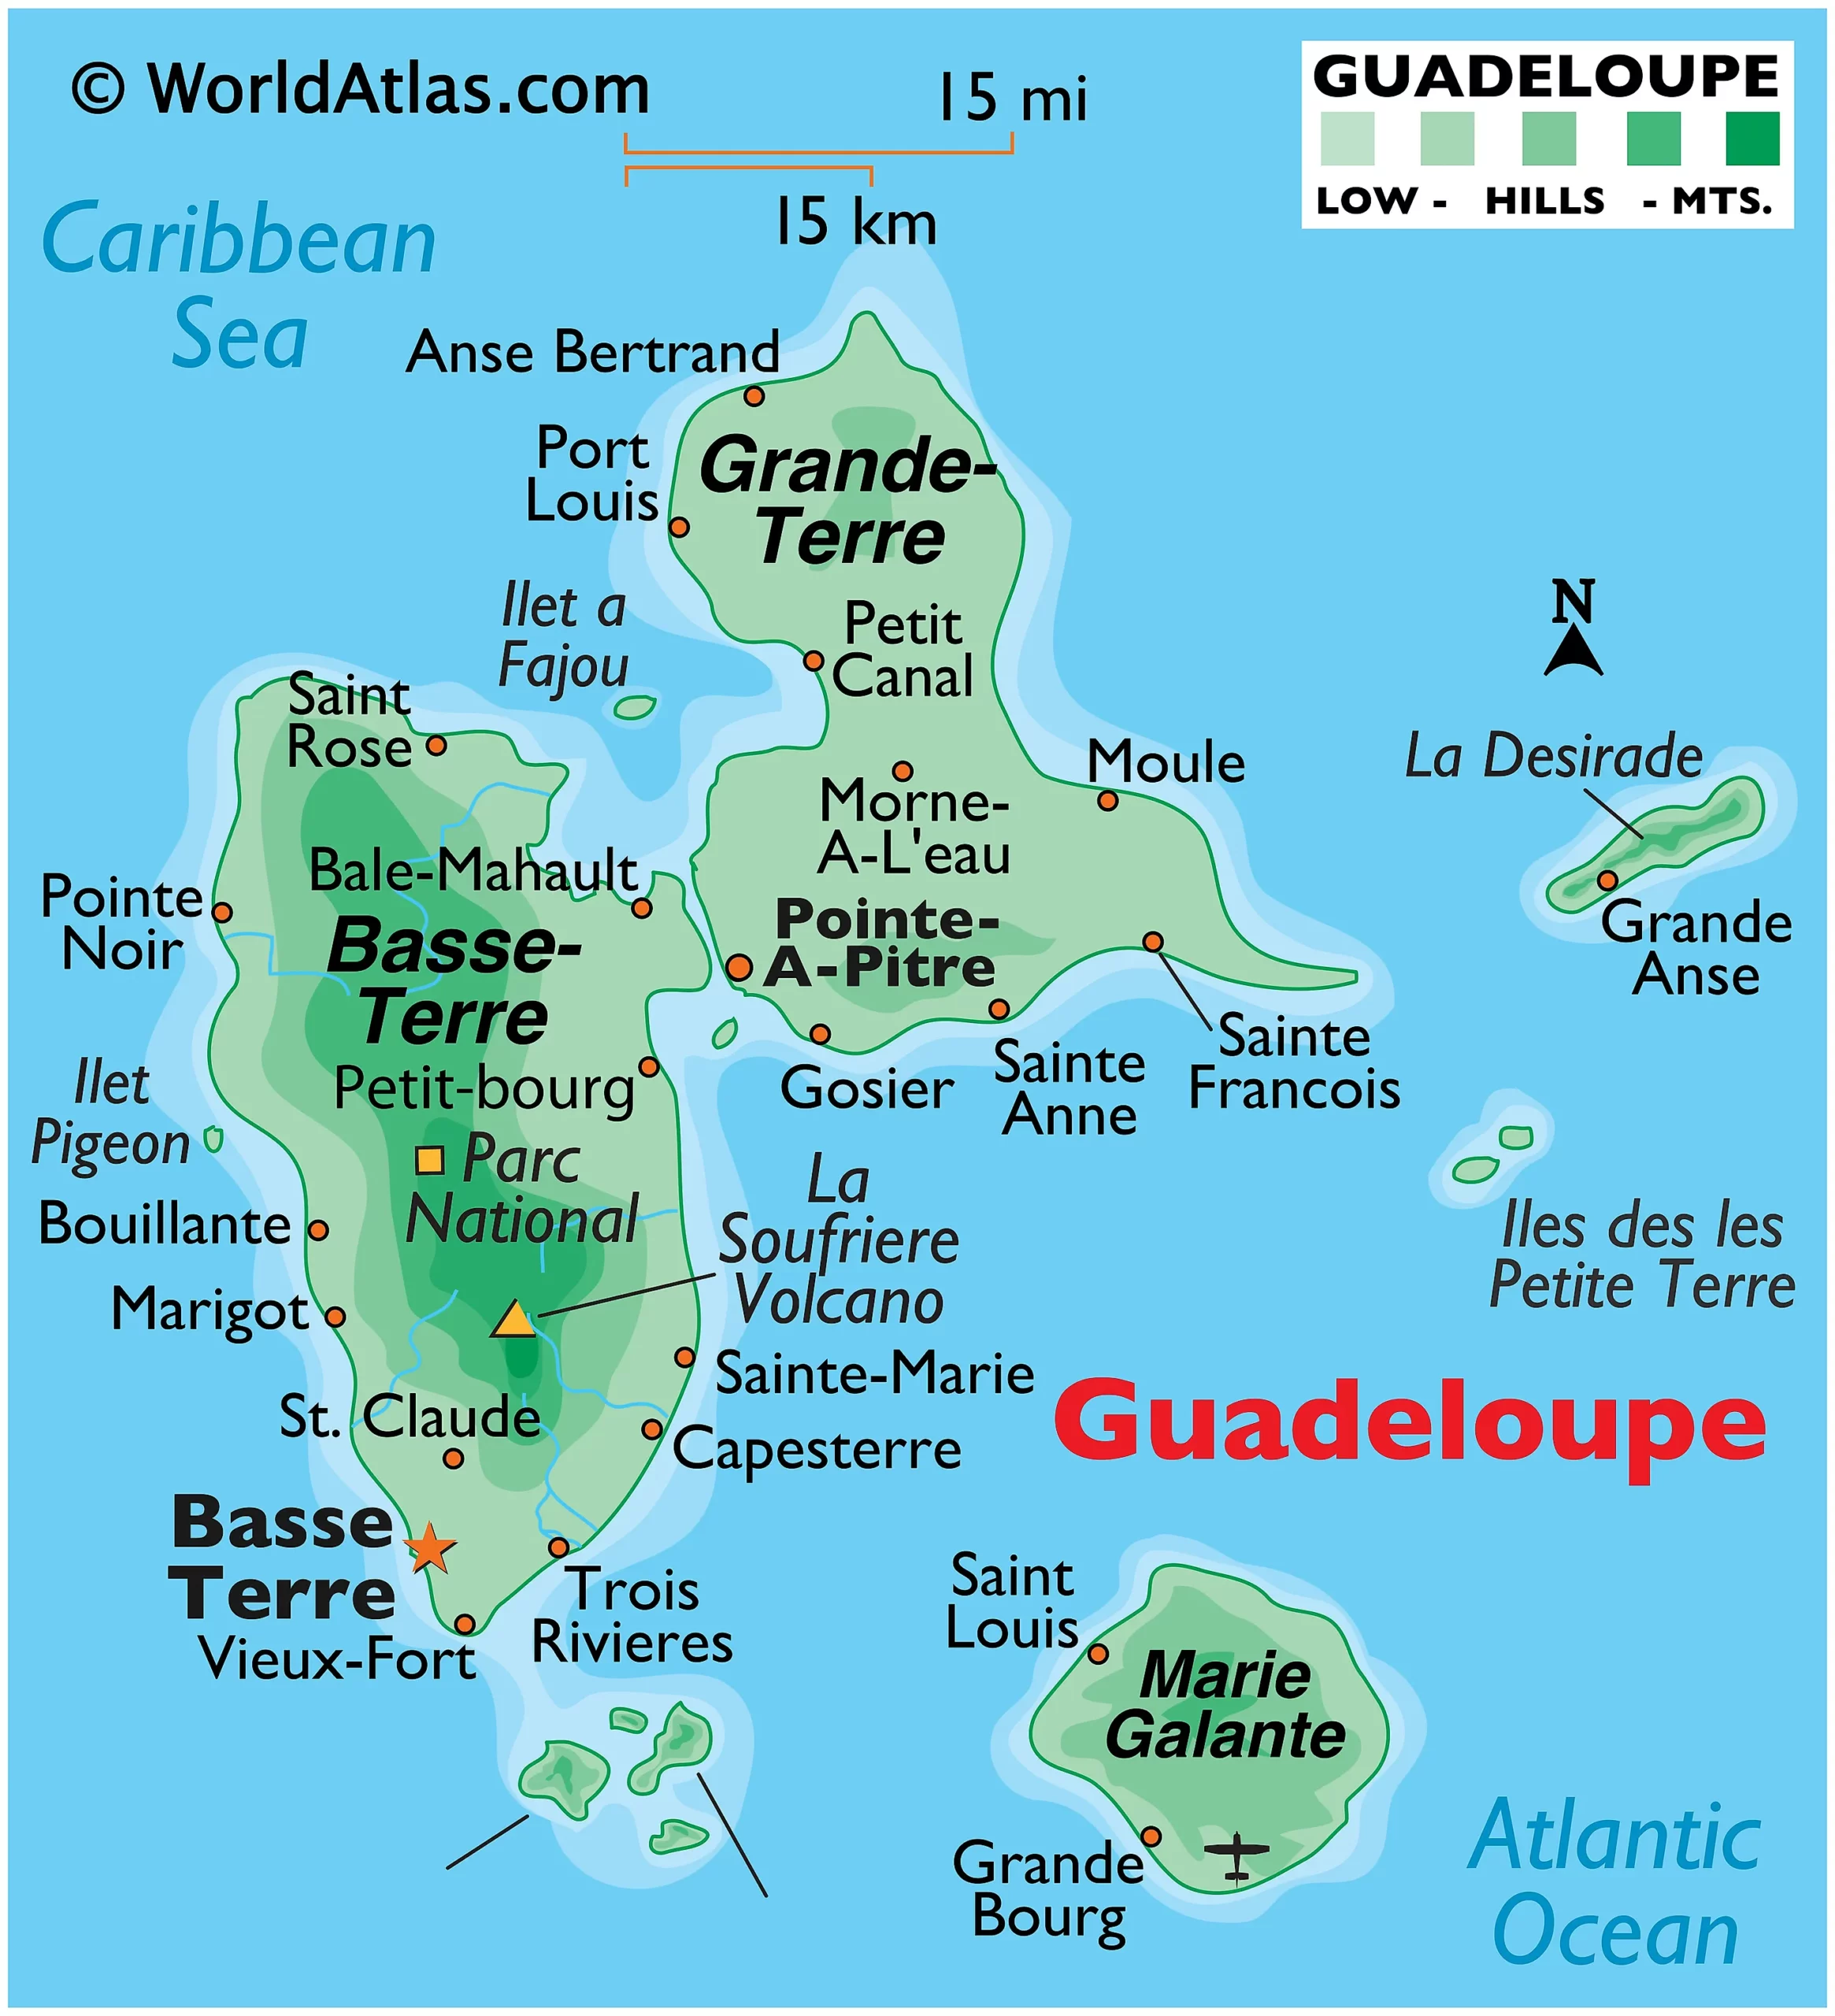 Guadeloupe Island: Where To Stay - An Island Guide